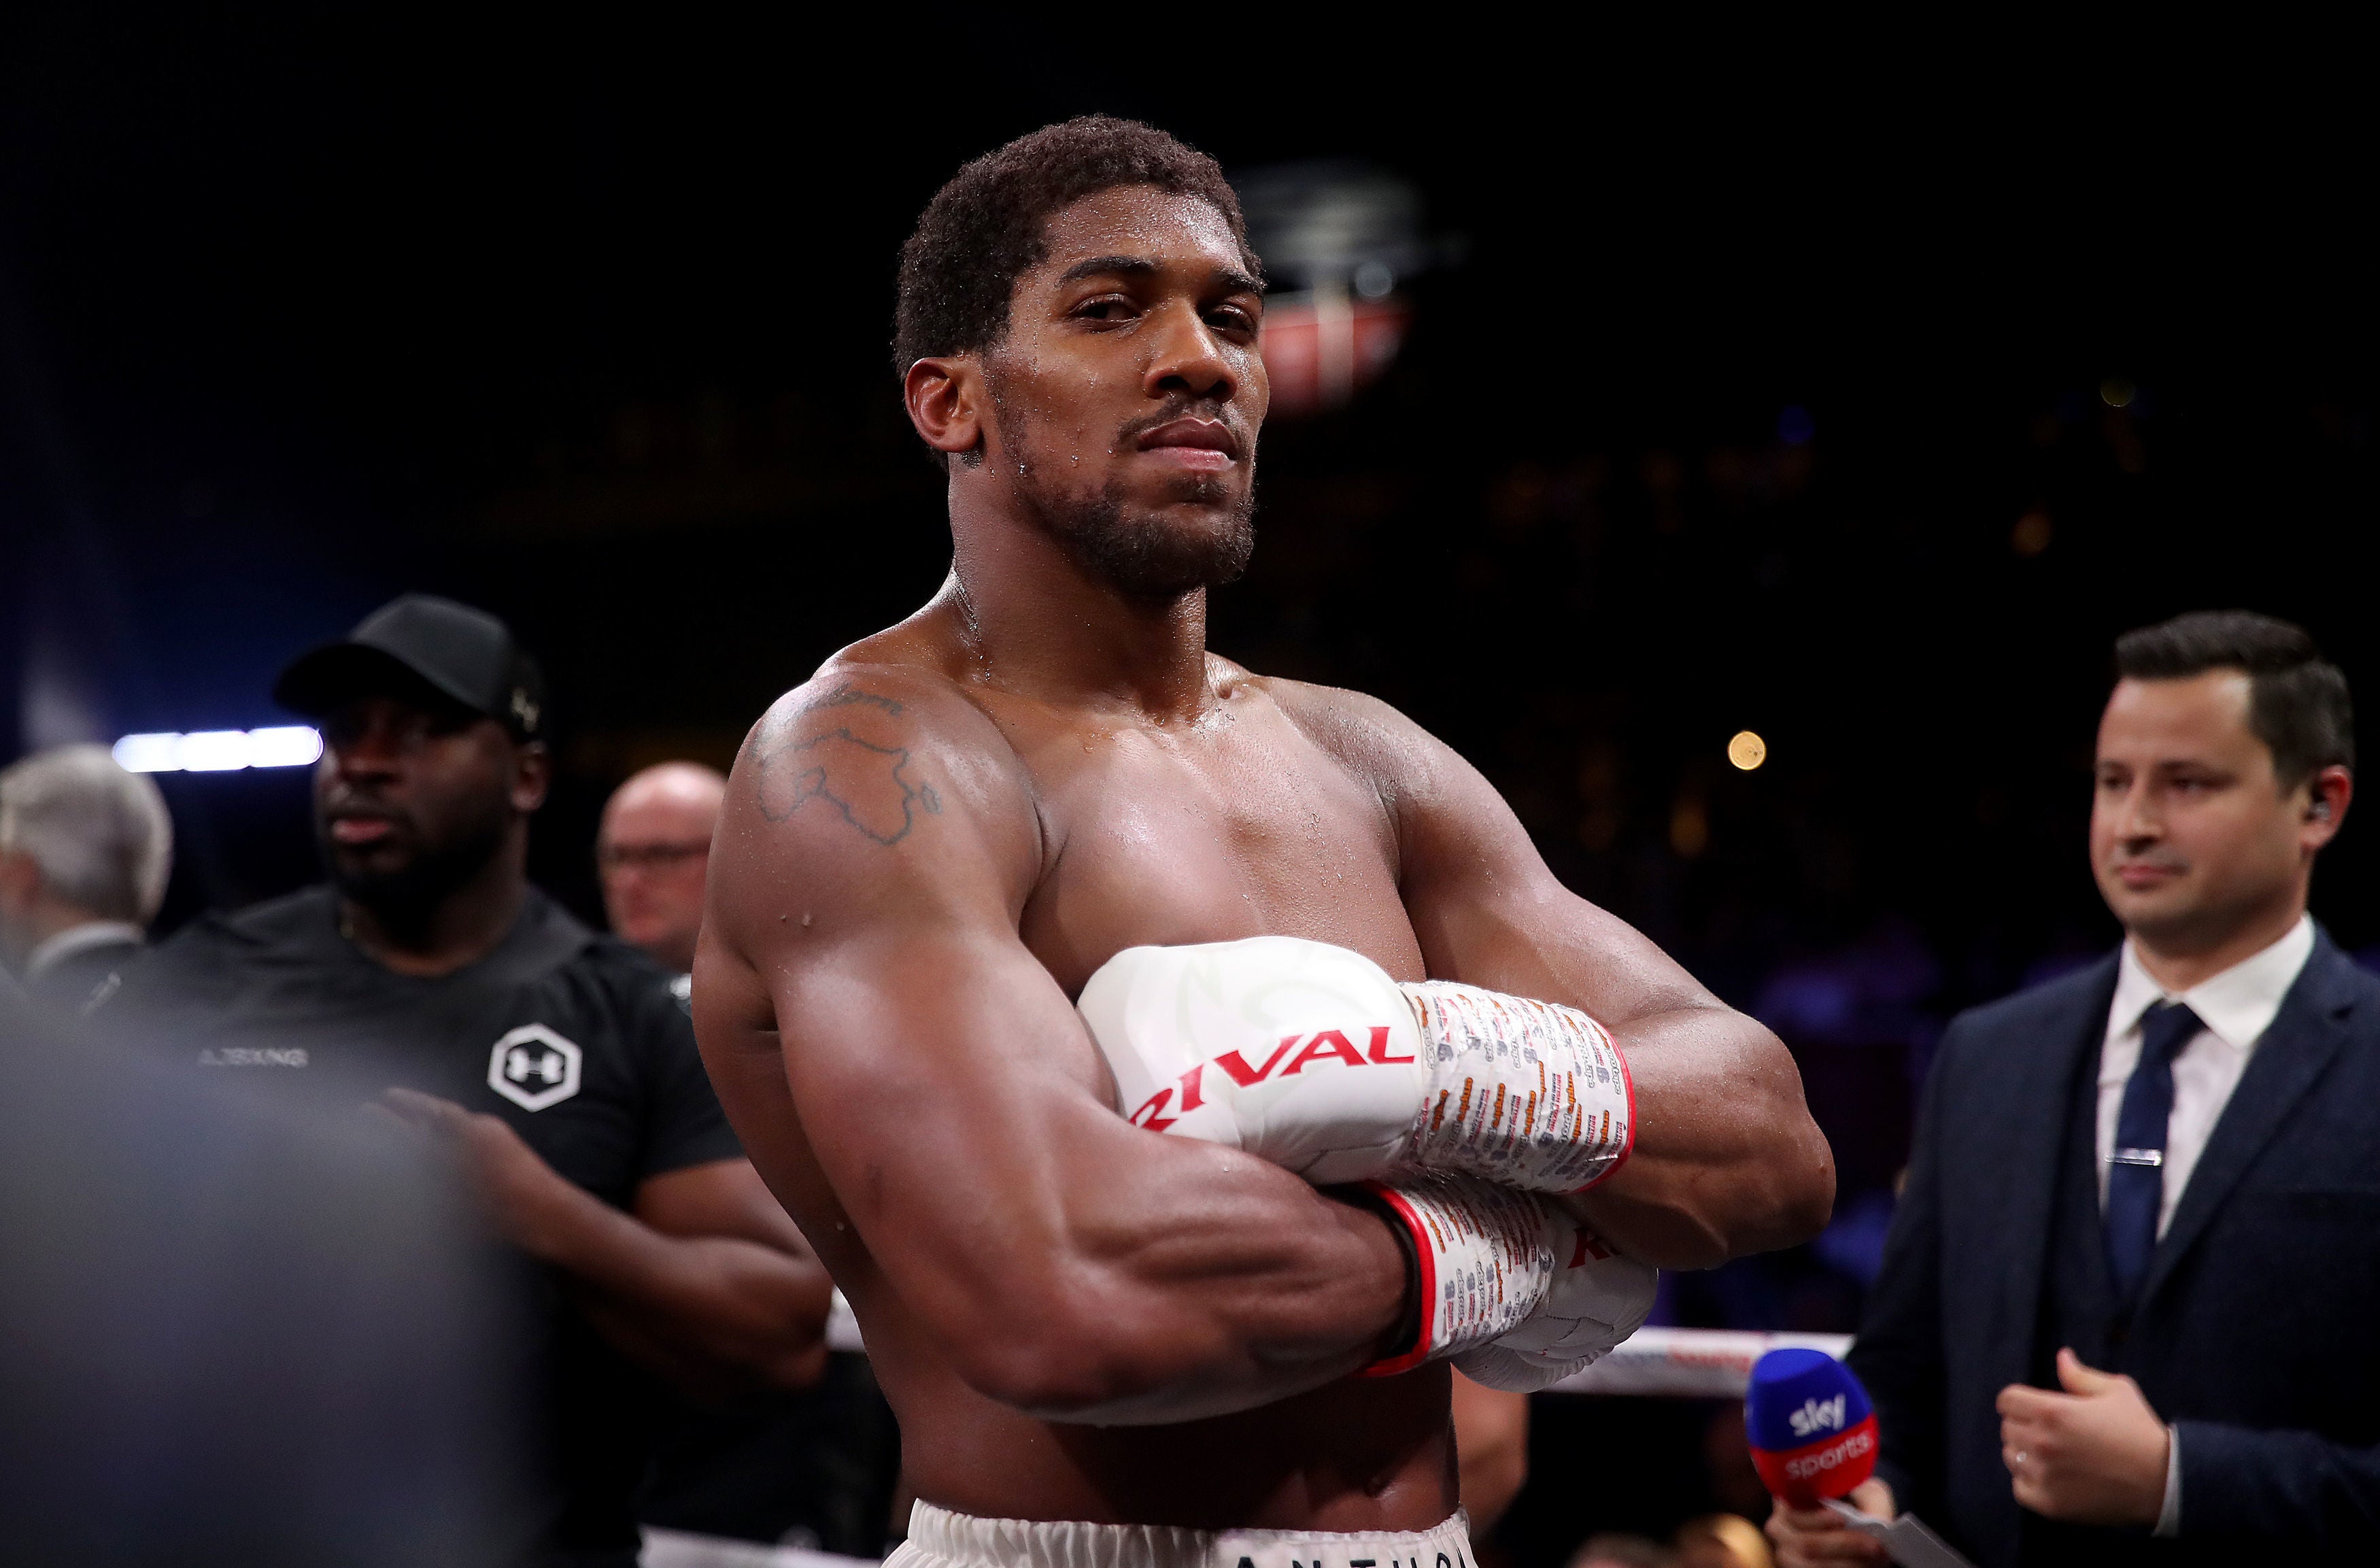 Anthony Joshua vs Tyson Fury fight contract will be signed within four weeks, says Eddie Hearn